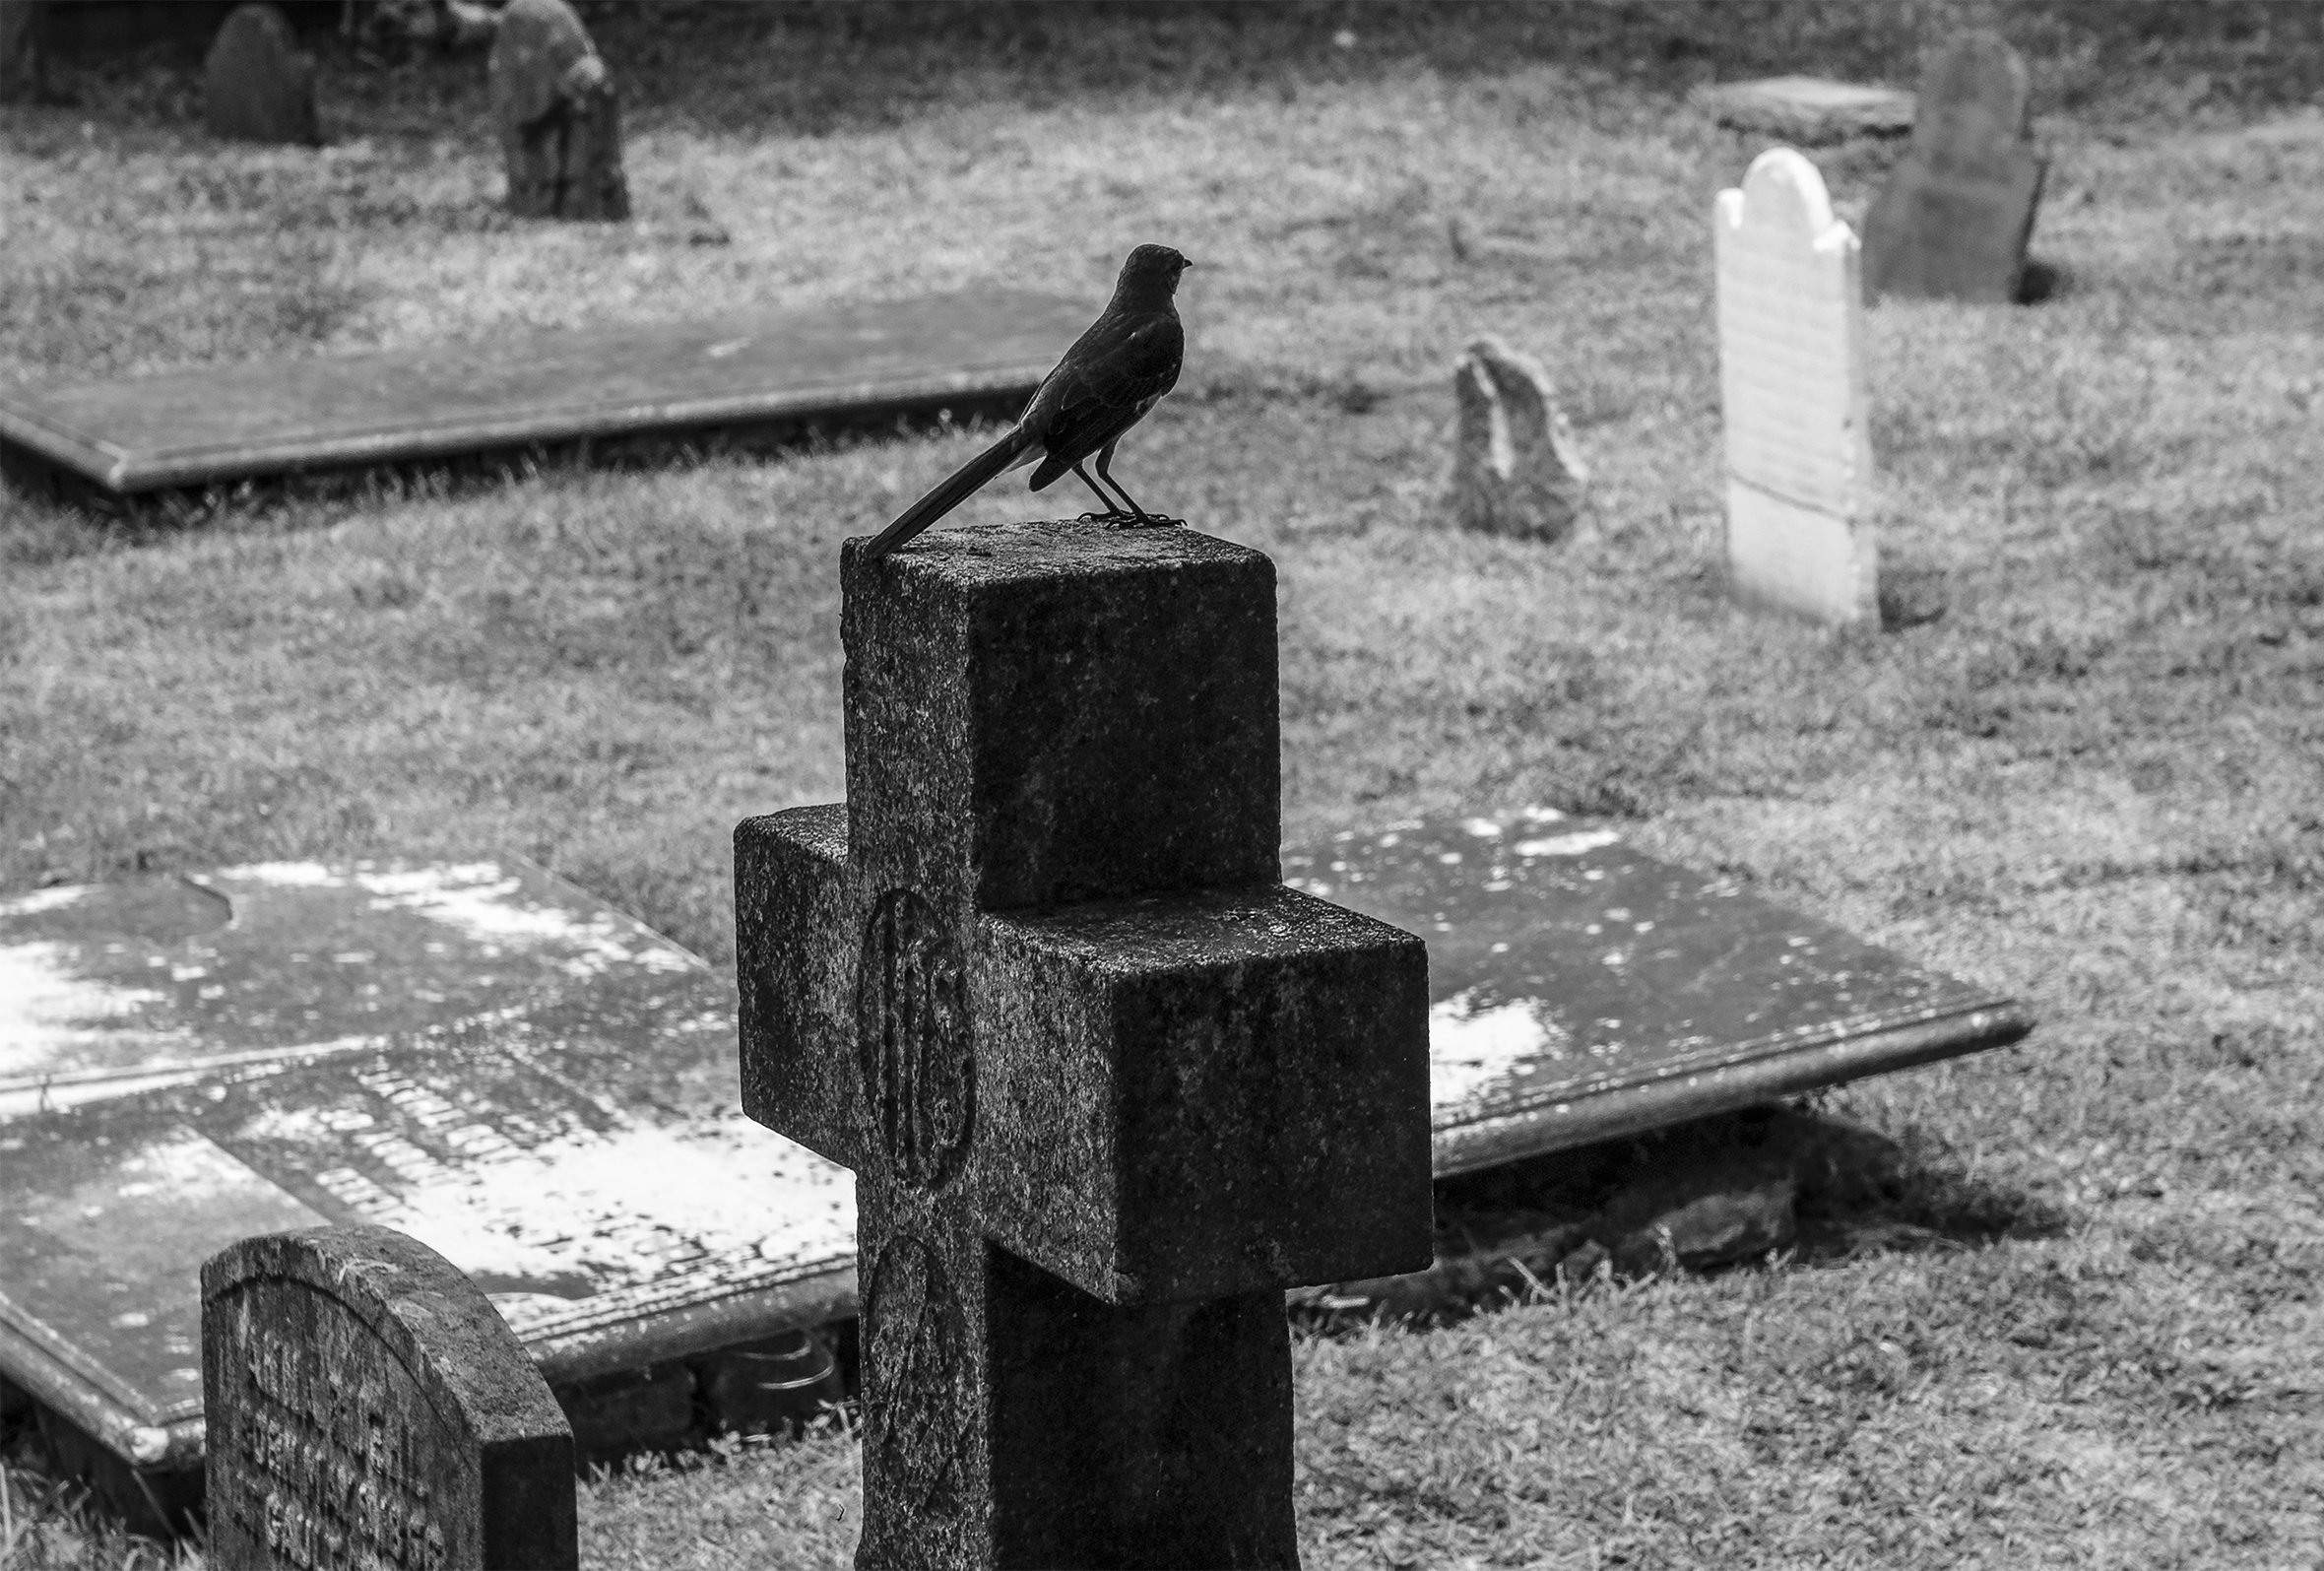 A small bird stands atop a tombstone cross at a cemetery with several upright monuments.